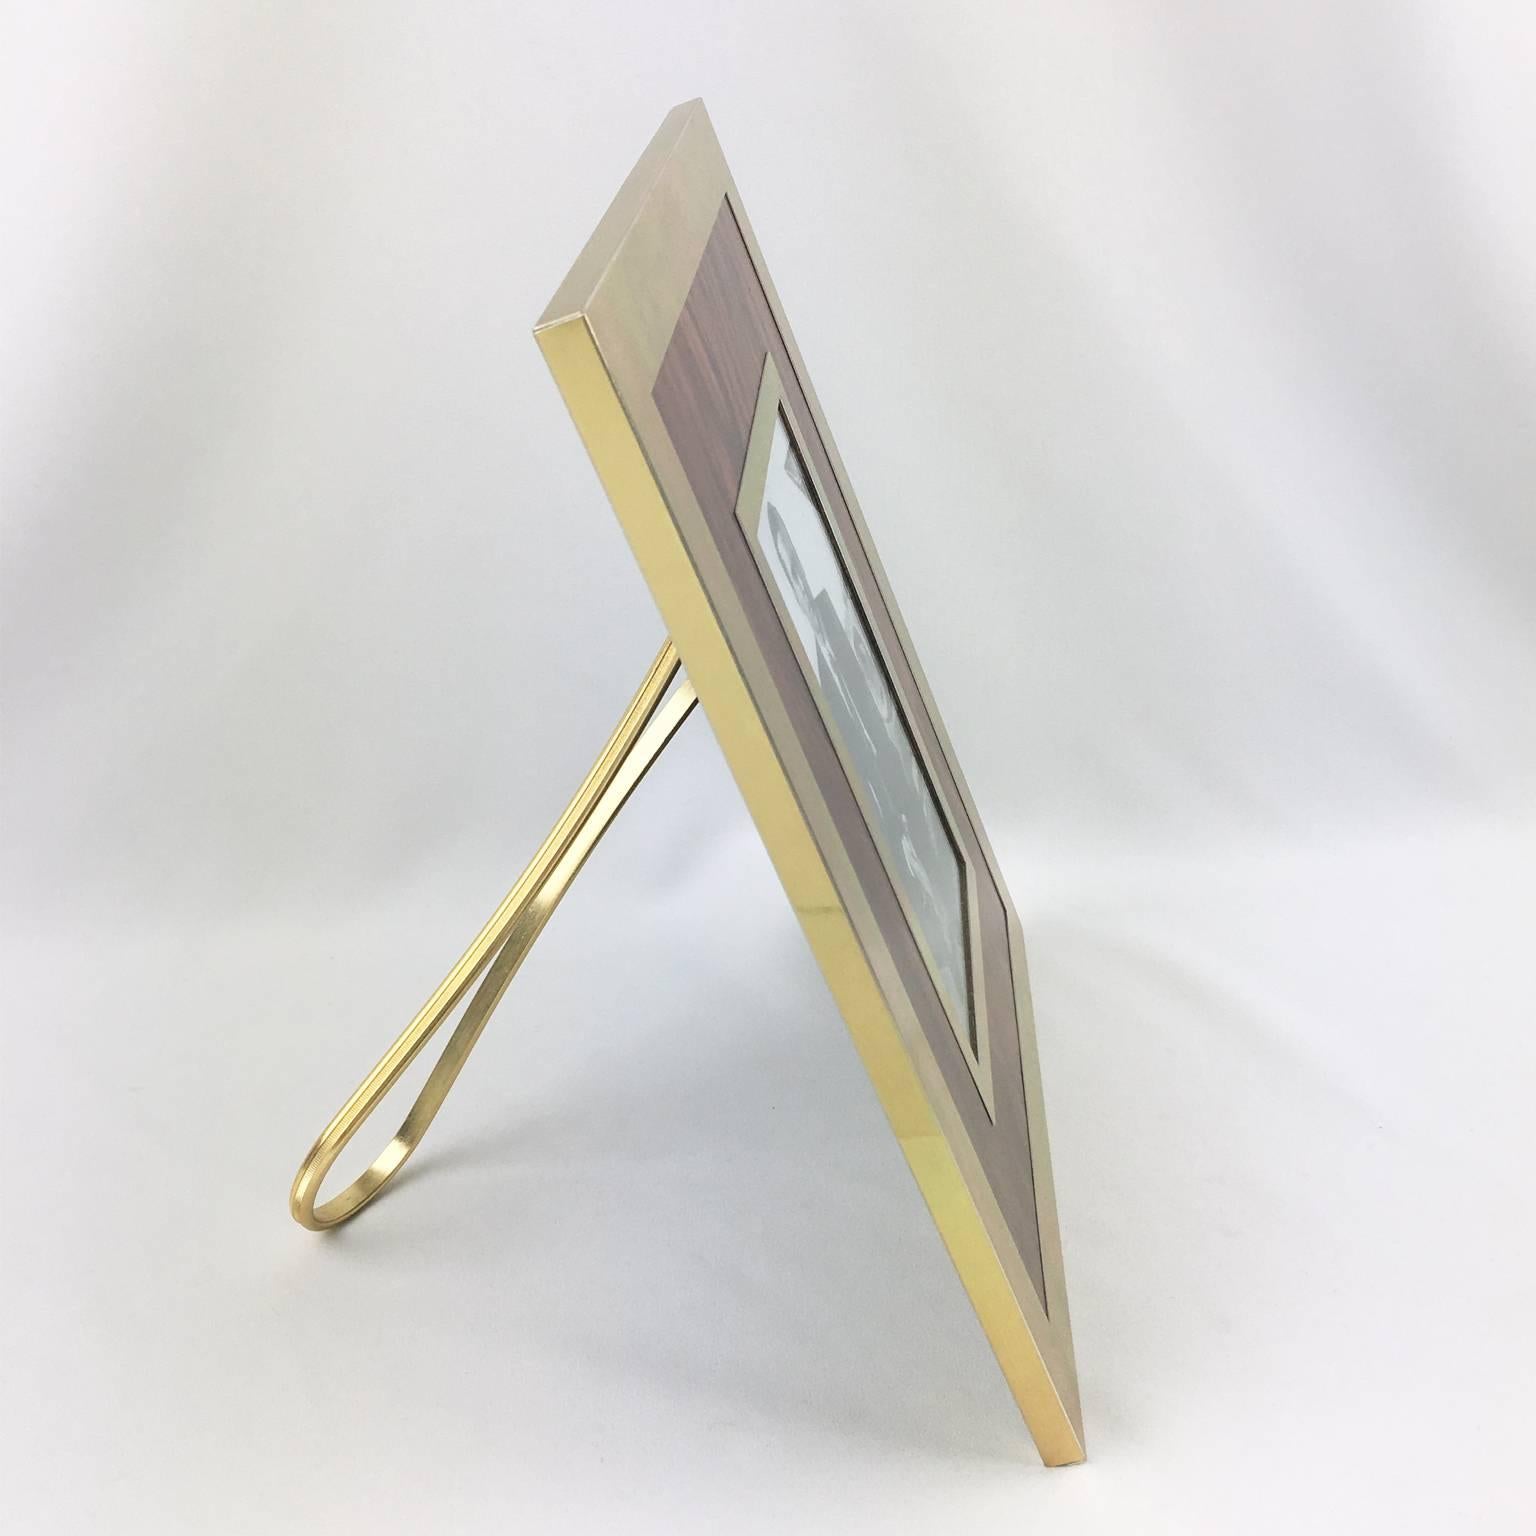 Lovely vintage Mid-Century Modern picture photo frame, manufactured by Italian designer MB. Gilded aluminum and formica imitating flamed walnut wood. Metal easel at the back. Marked on easel: 'Made in Italy - MB brand logo'.
Please check our